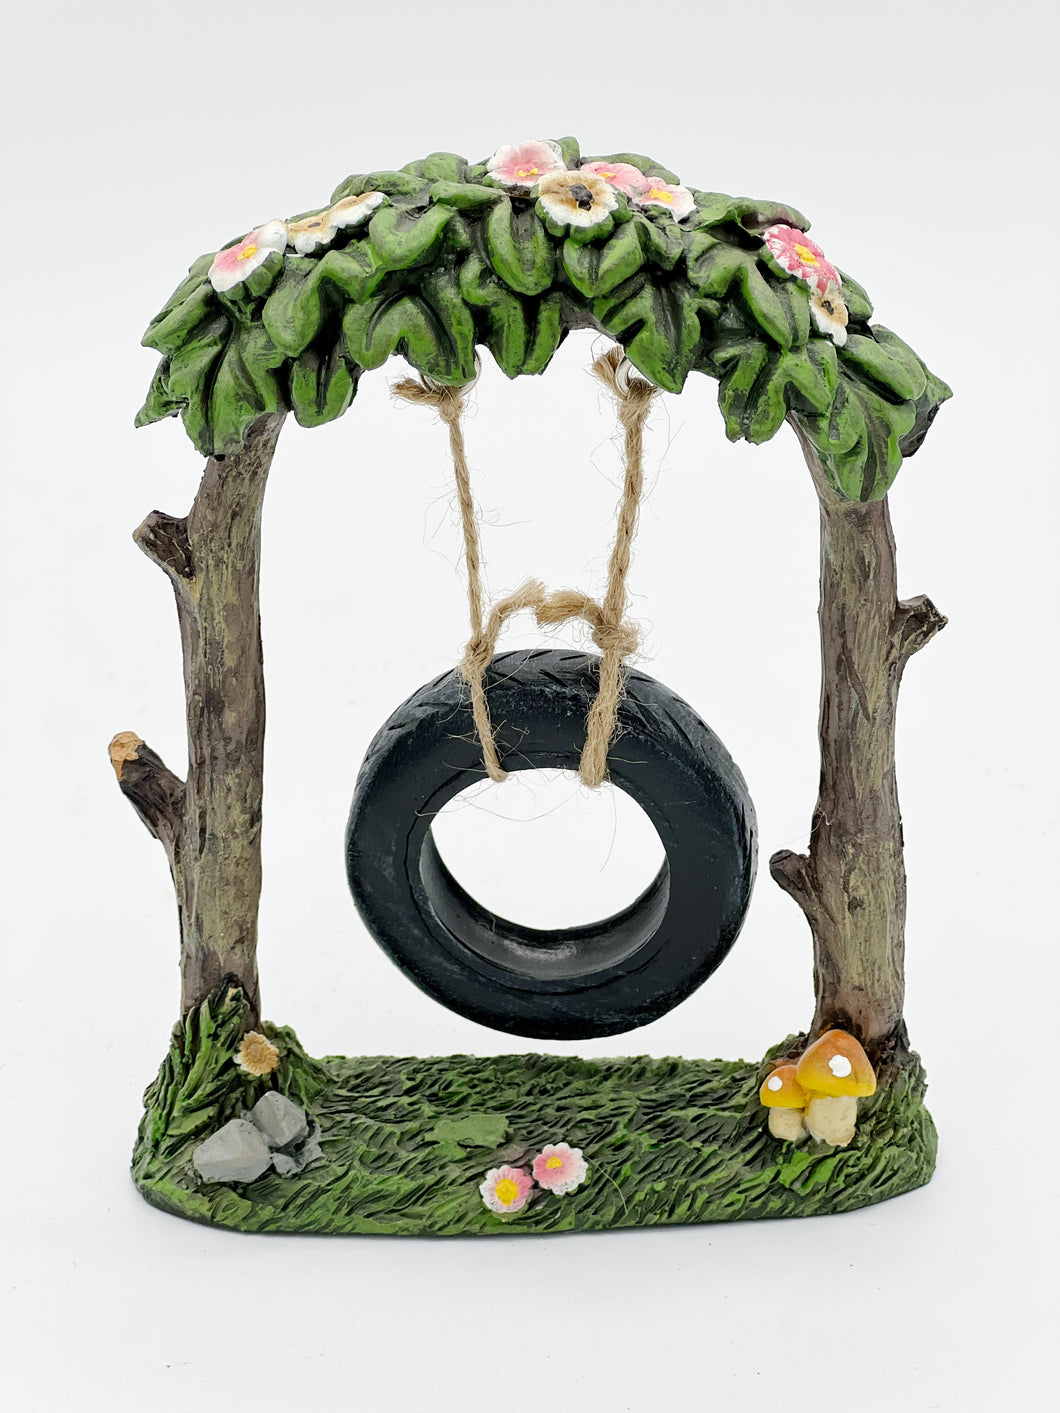 Arch with tire swing